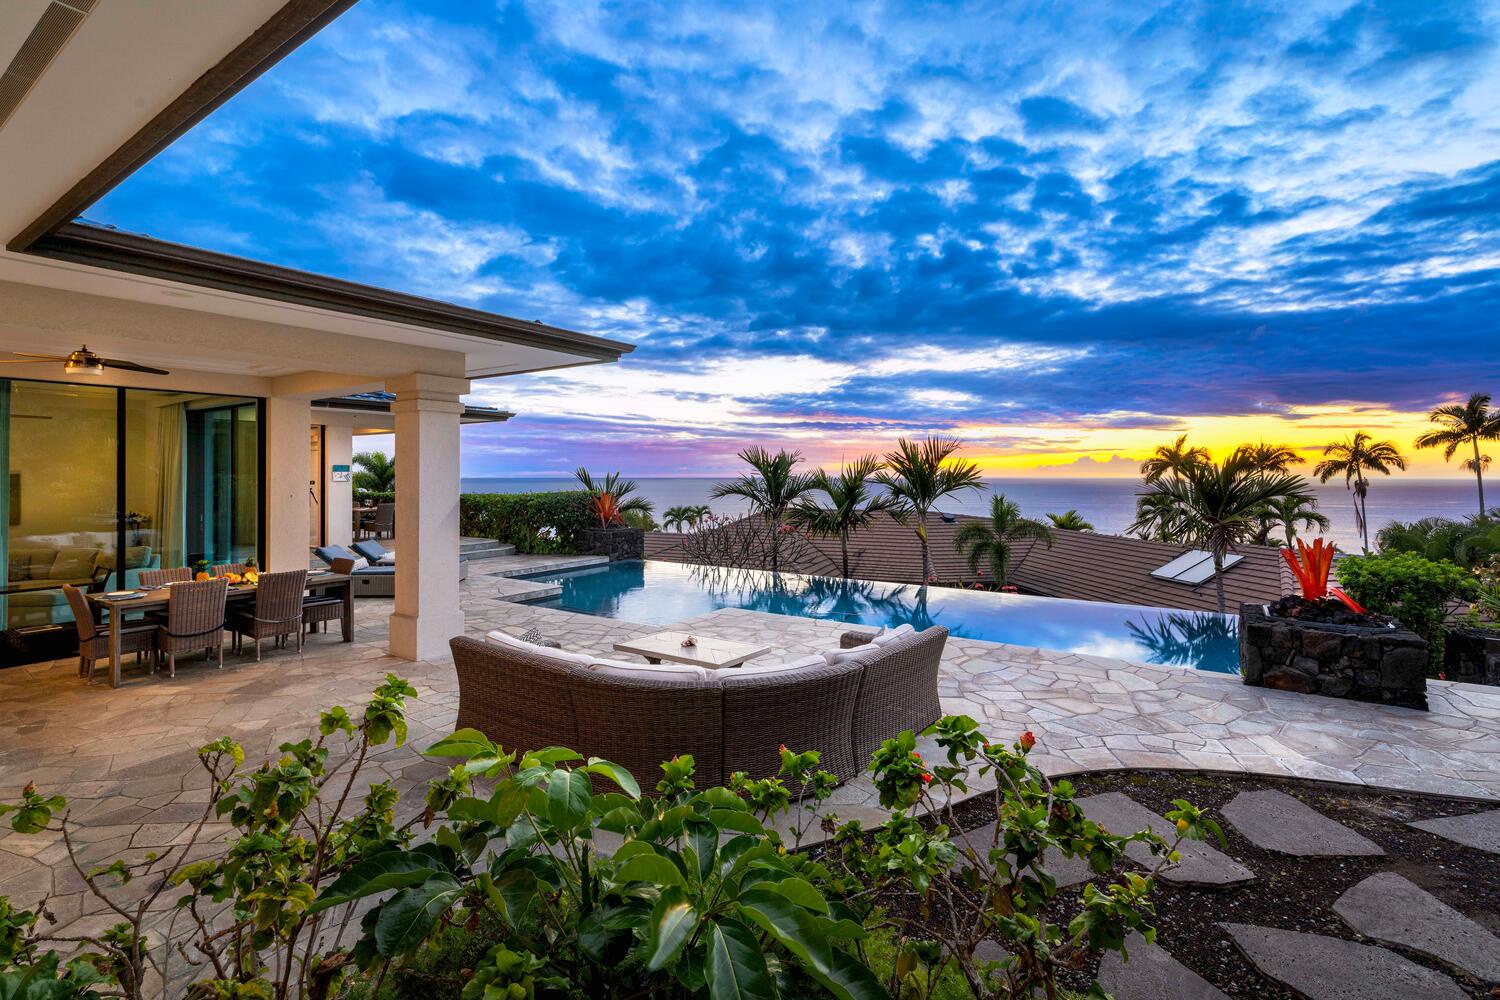 Kailua Kona Vacation Rentals, Blue Hawaii - Sleek lap pool with a stunning ocean view, perfect for refreshing swims or leisurely laps under the clear blue sky.